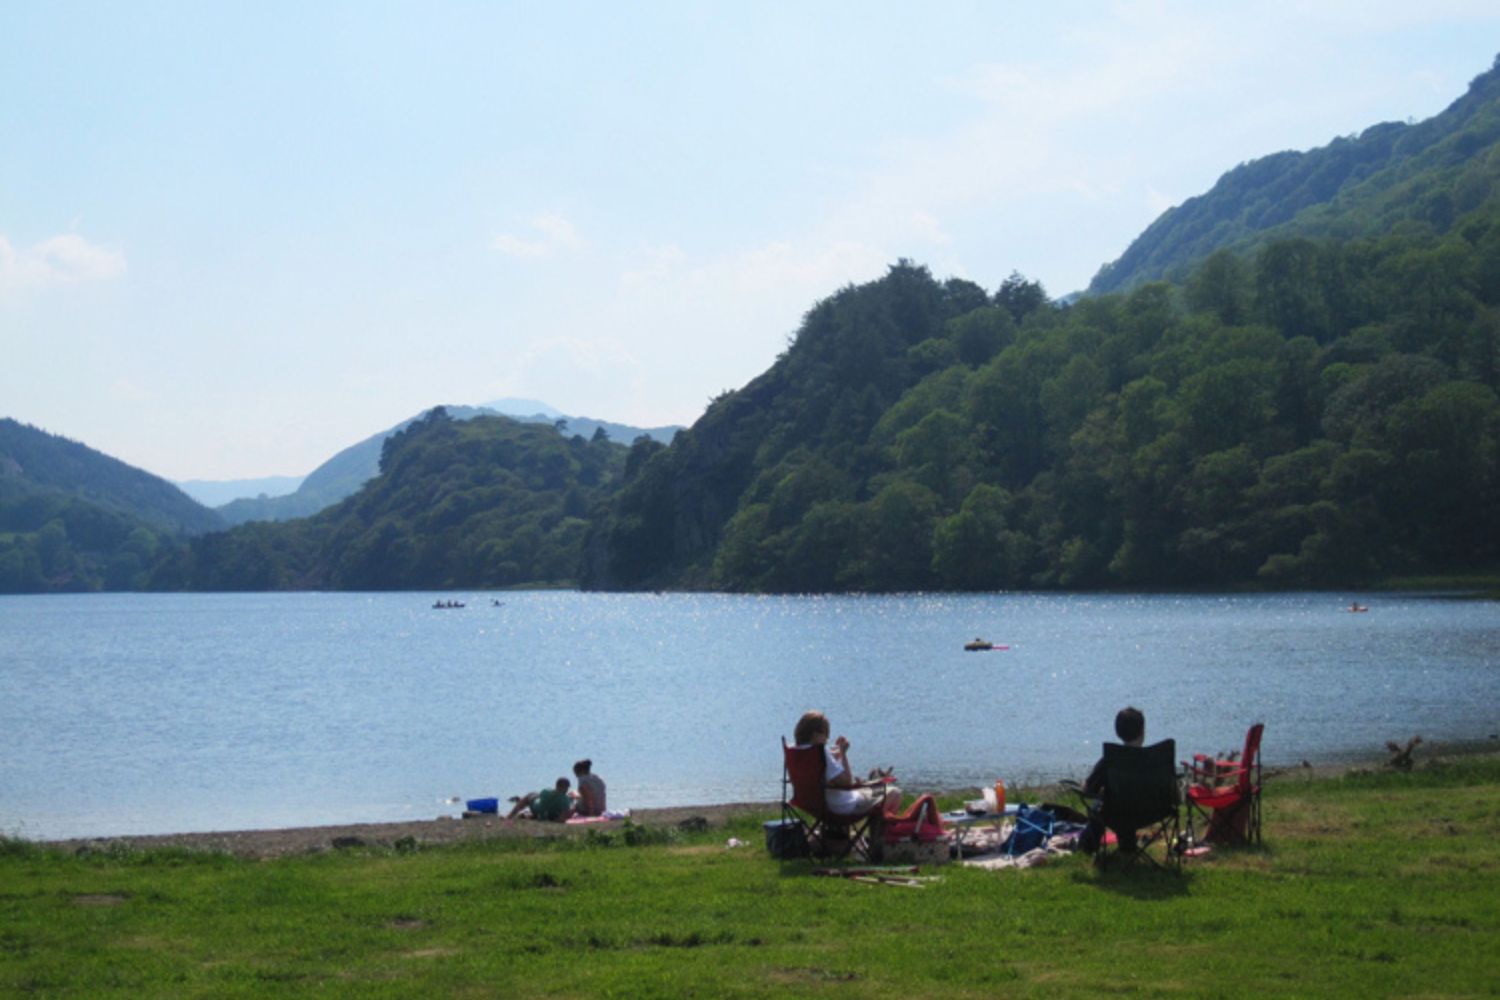 Family sat on grass beside lake with mountains and trees in background, Snowdonia